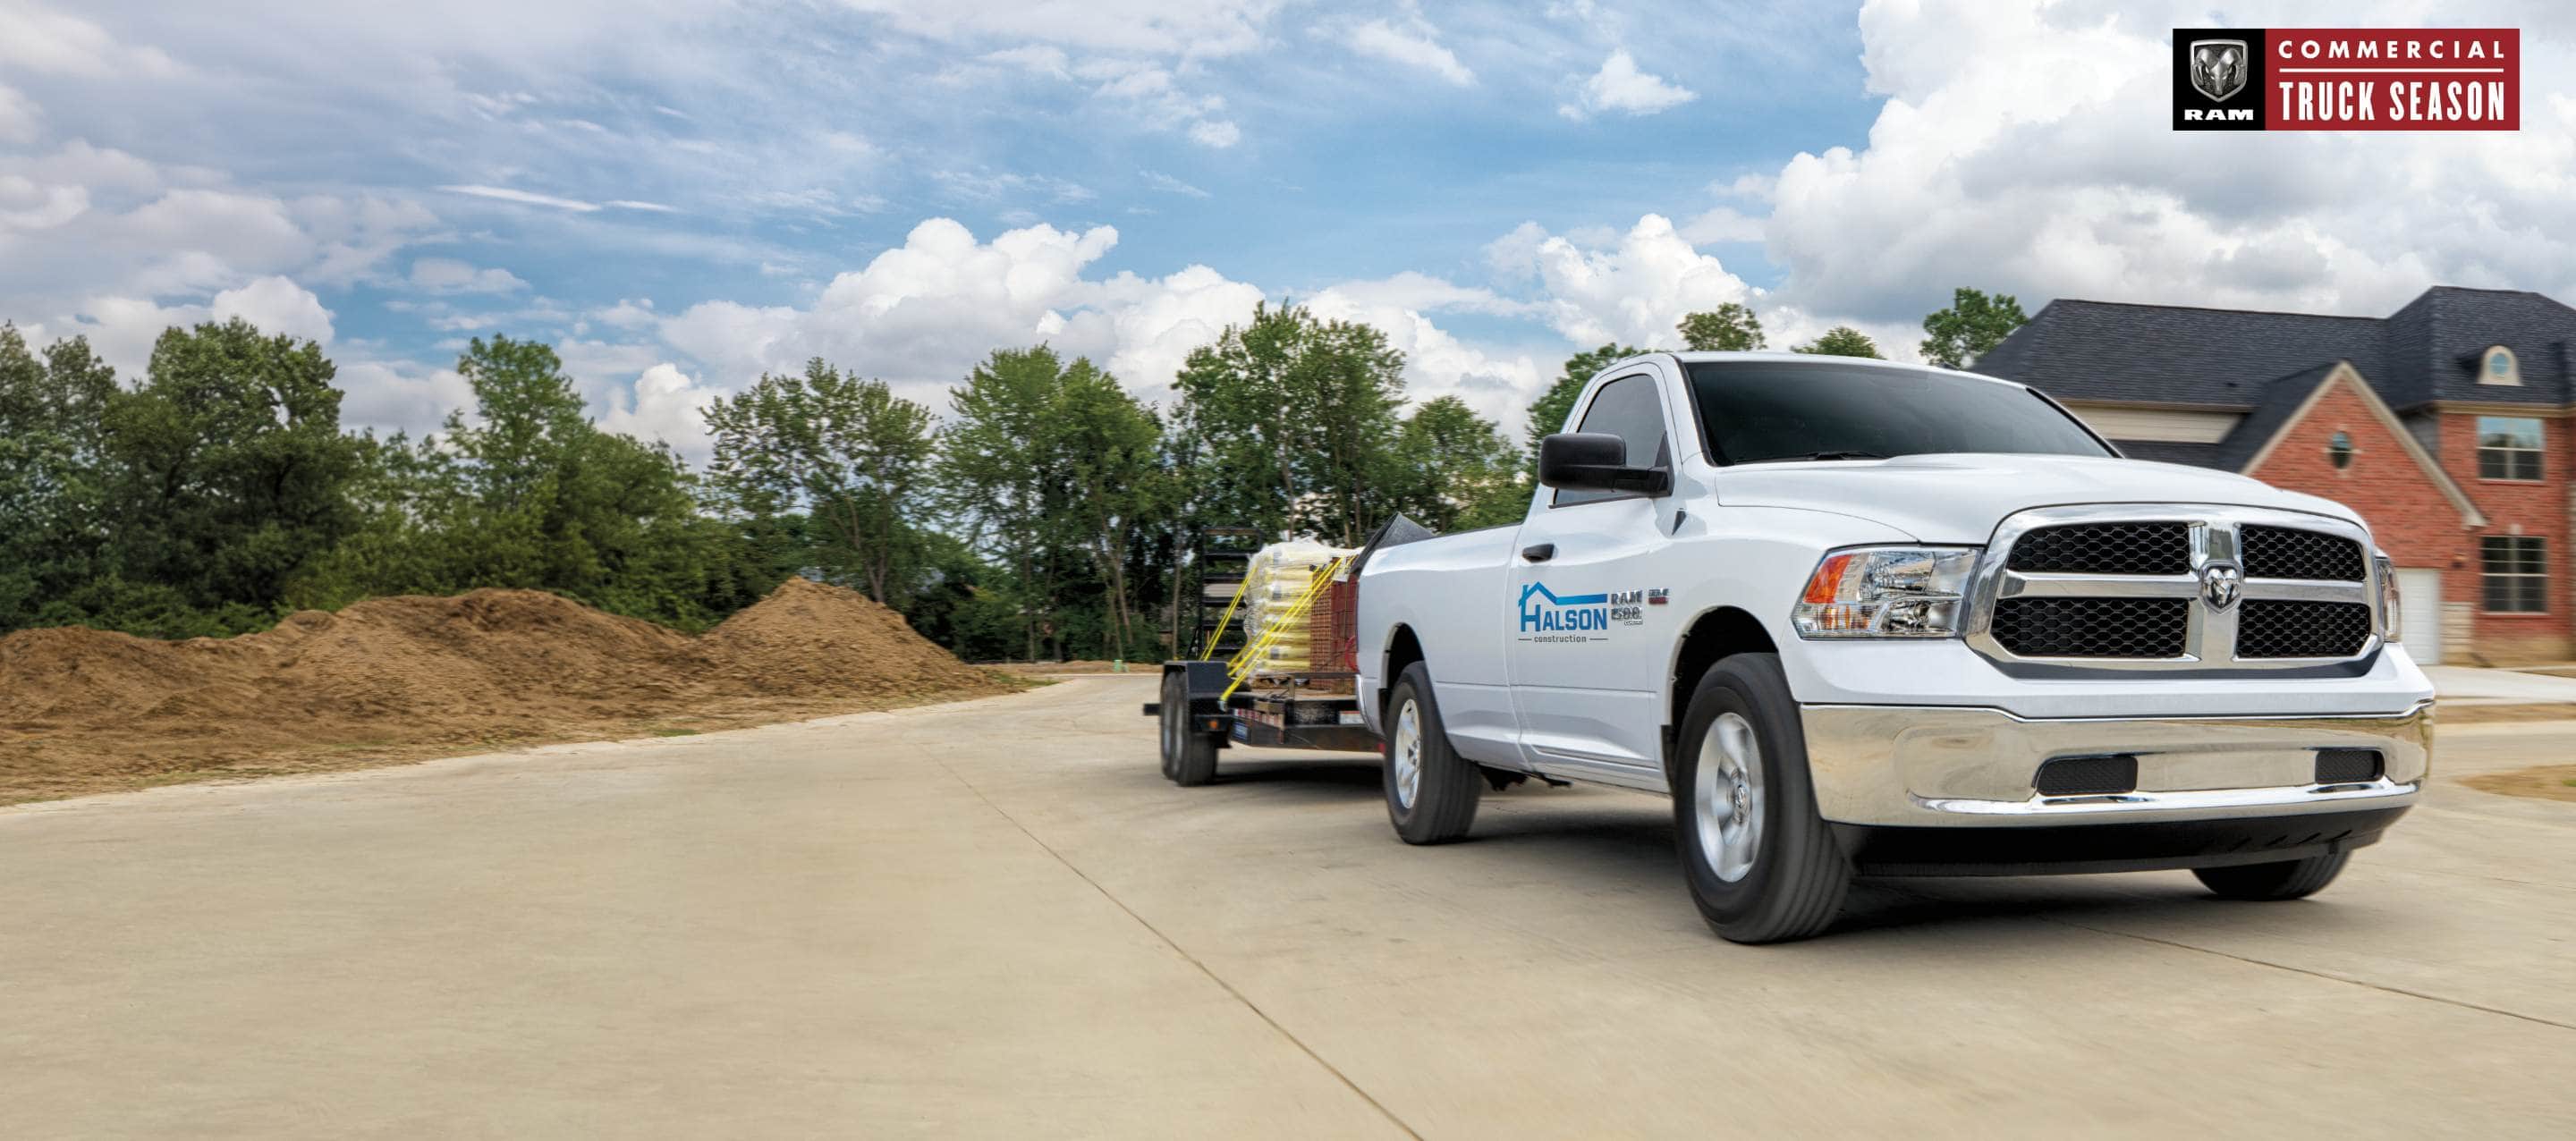 A white 2023 Ram 1500 Classic Tradesman 4x4 Regular Cab with a construction company's signage on its driver's door, towing a flatbed trailer carrying construction supplies as it pulls away from a residential neighborhood. Ram Commercial Truck Season.